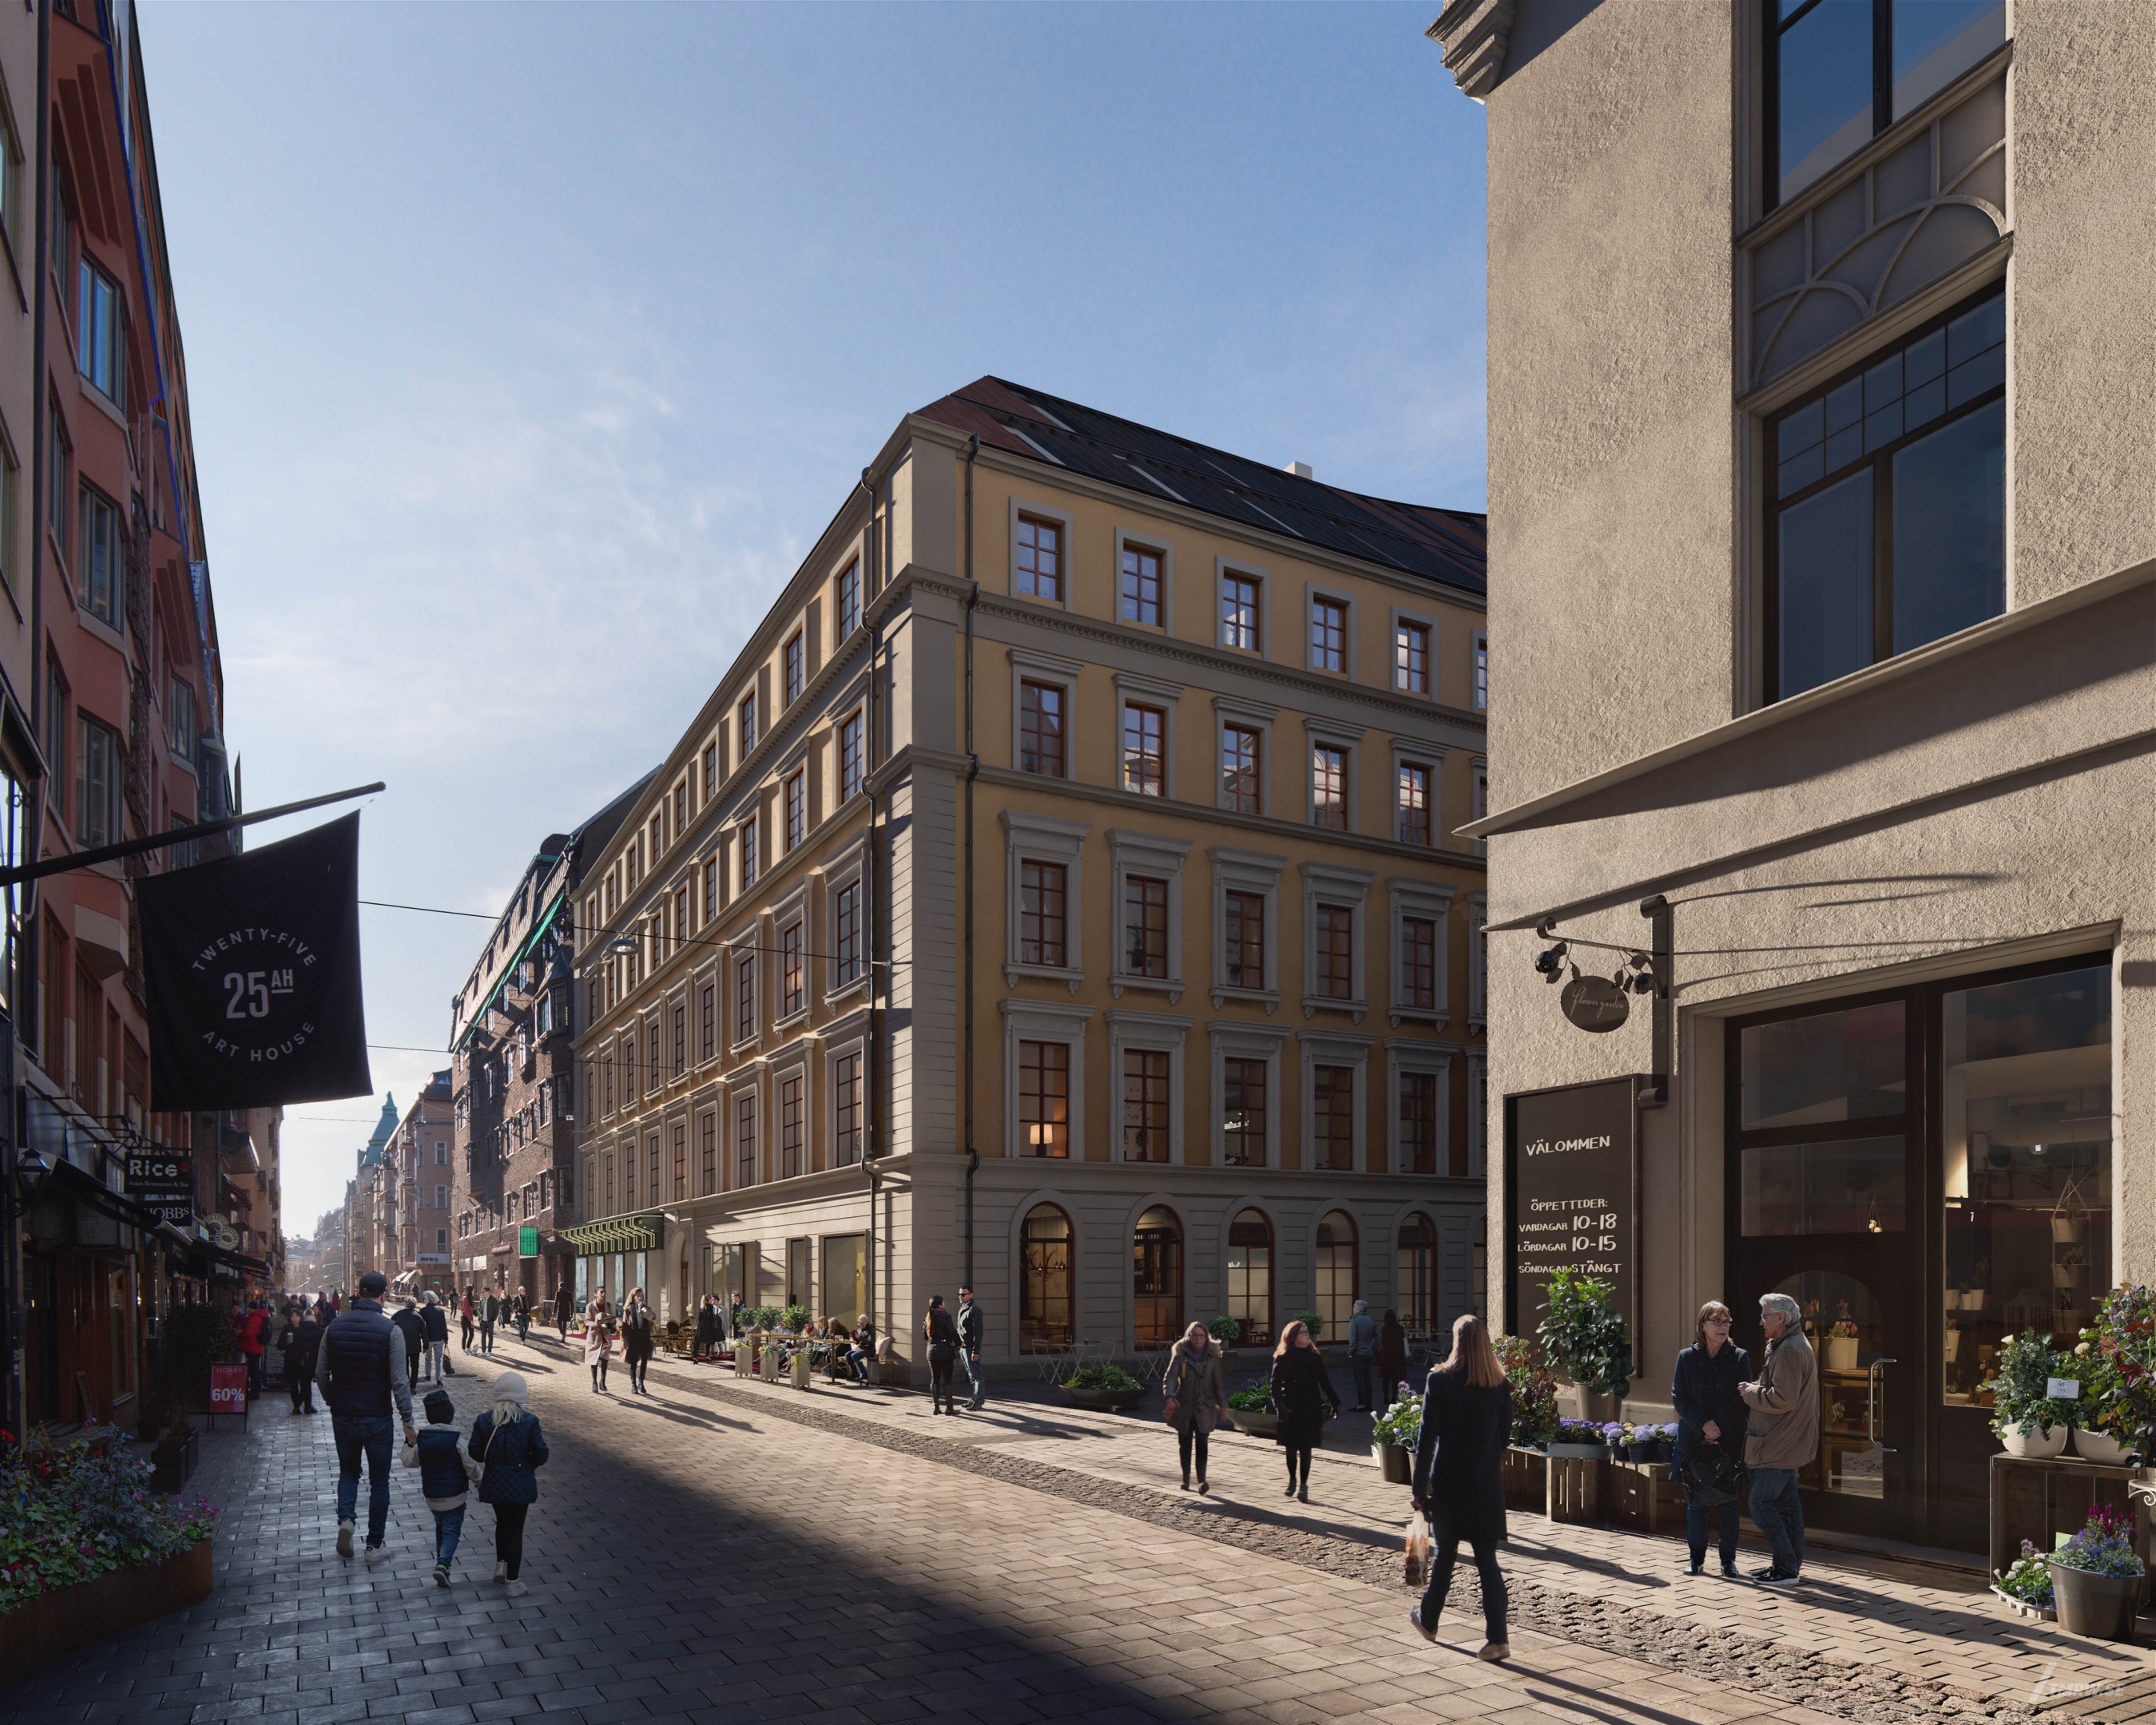 Architectural visualization of Astoria for Humlegården, city walking street, sunny day